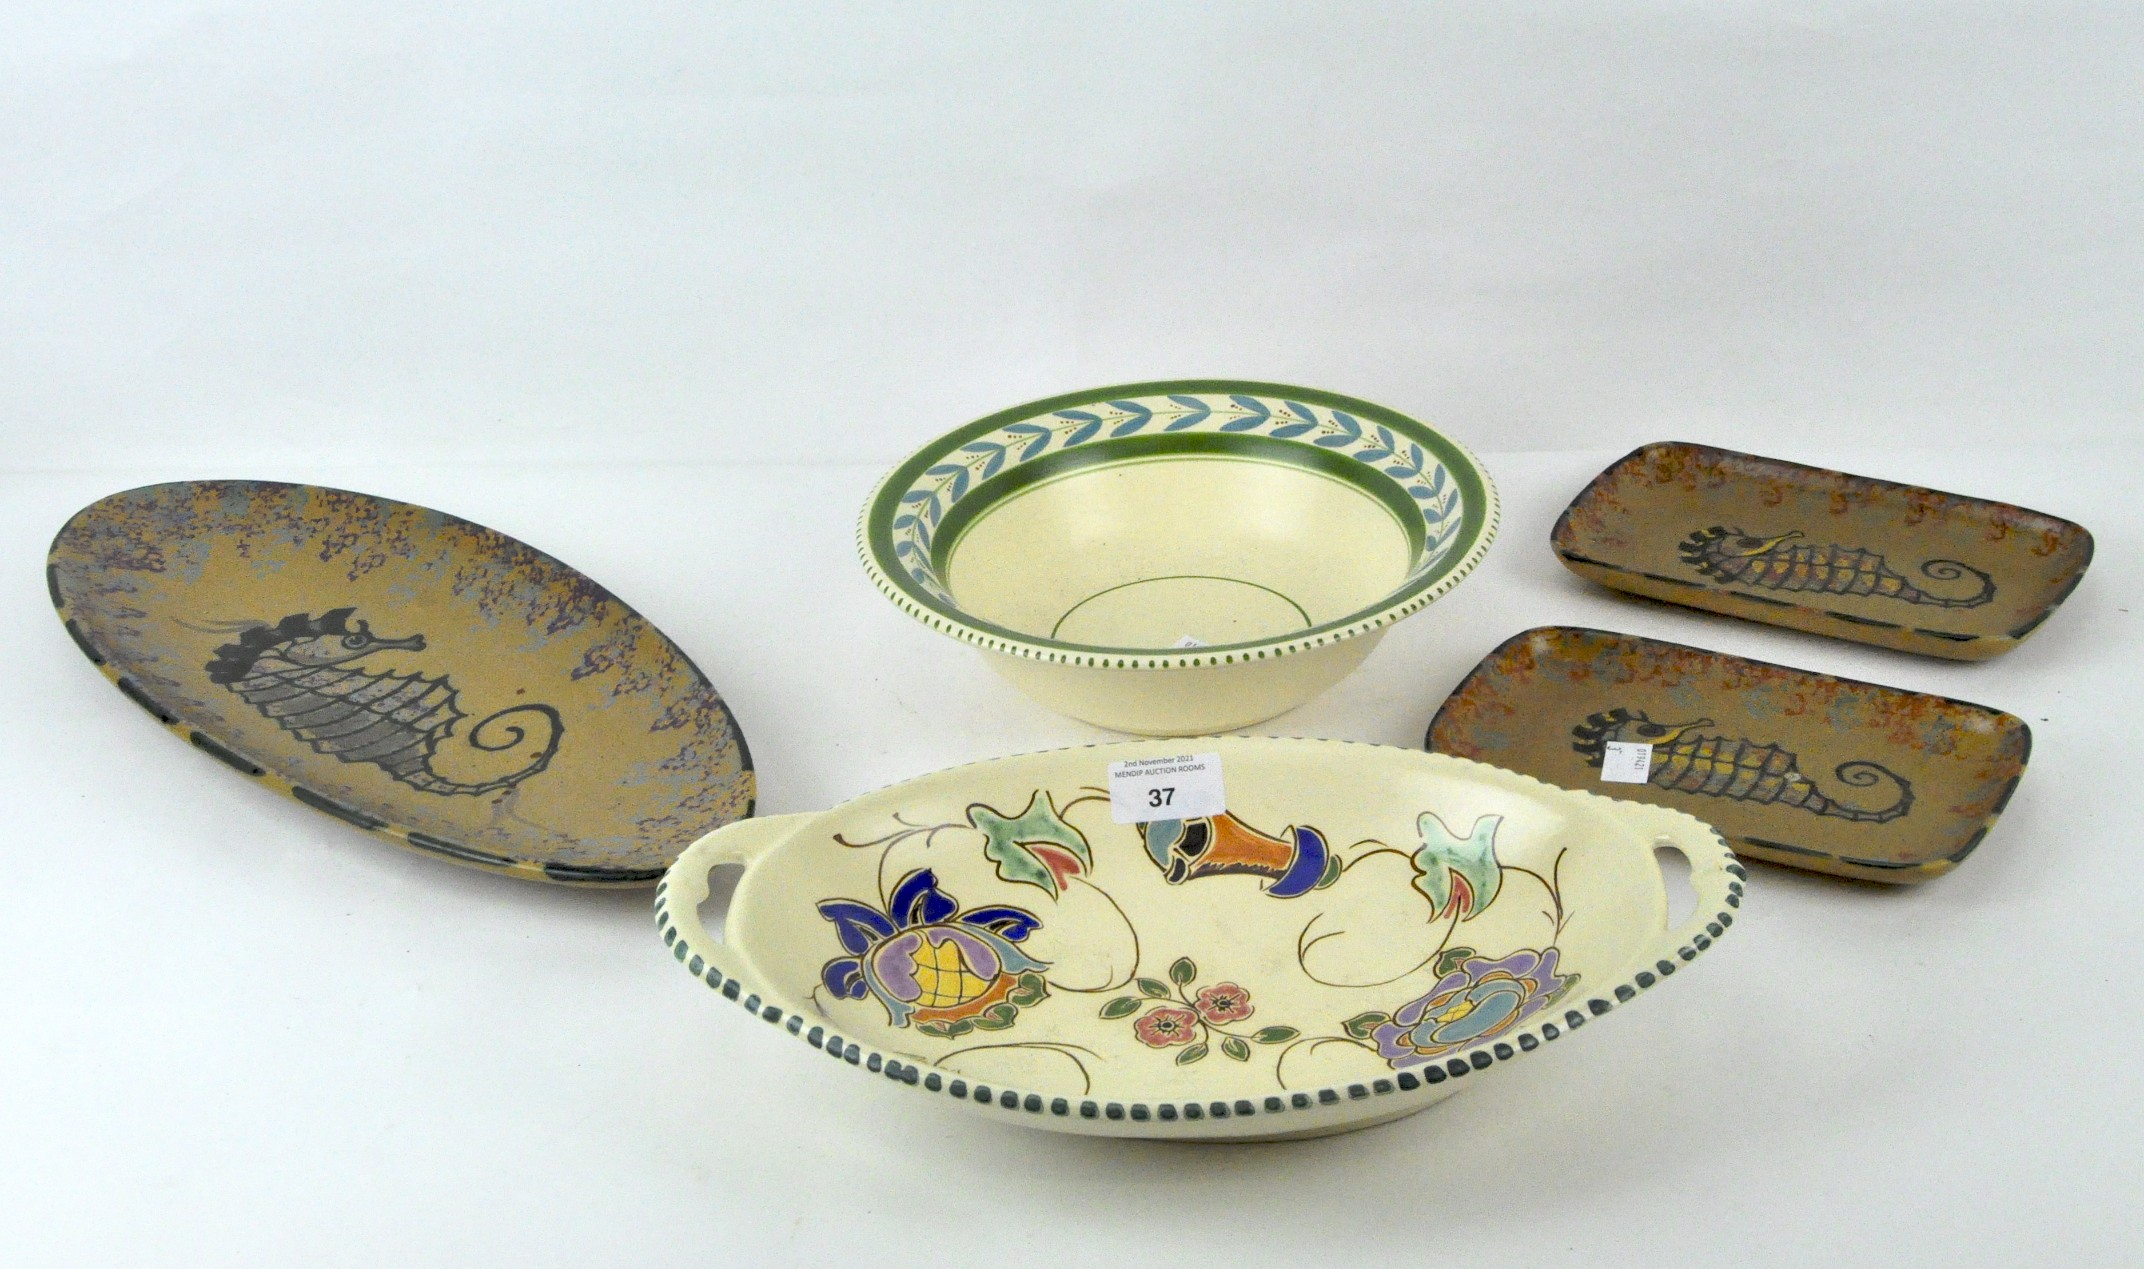 A Collard Honiton ceramic twin handled dish with floral details, together with a Honiton bowl